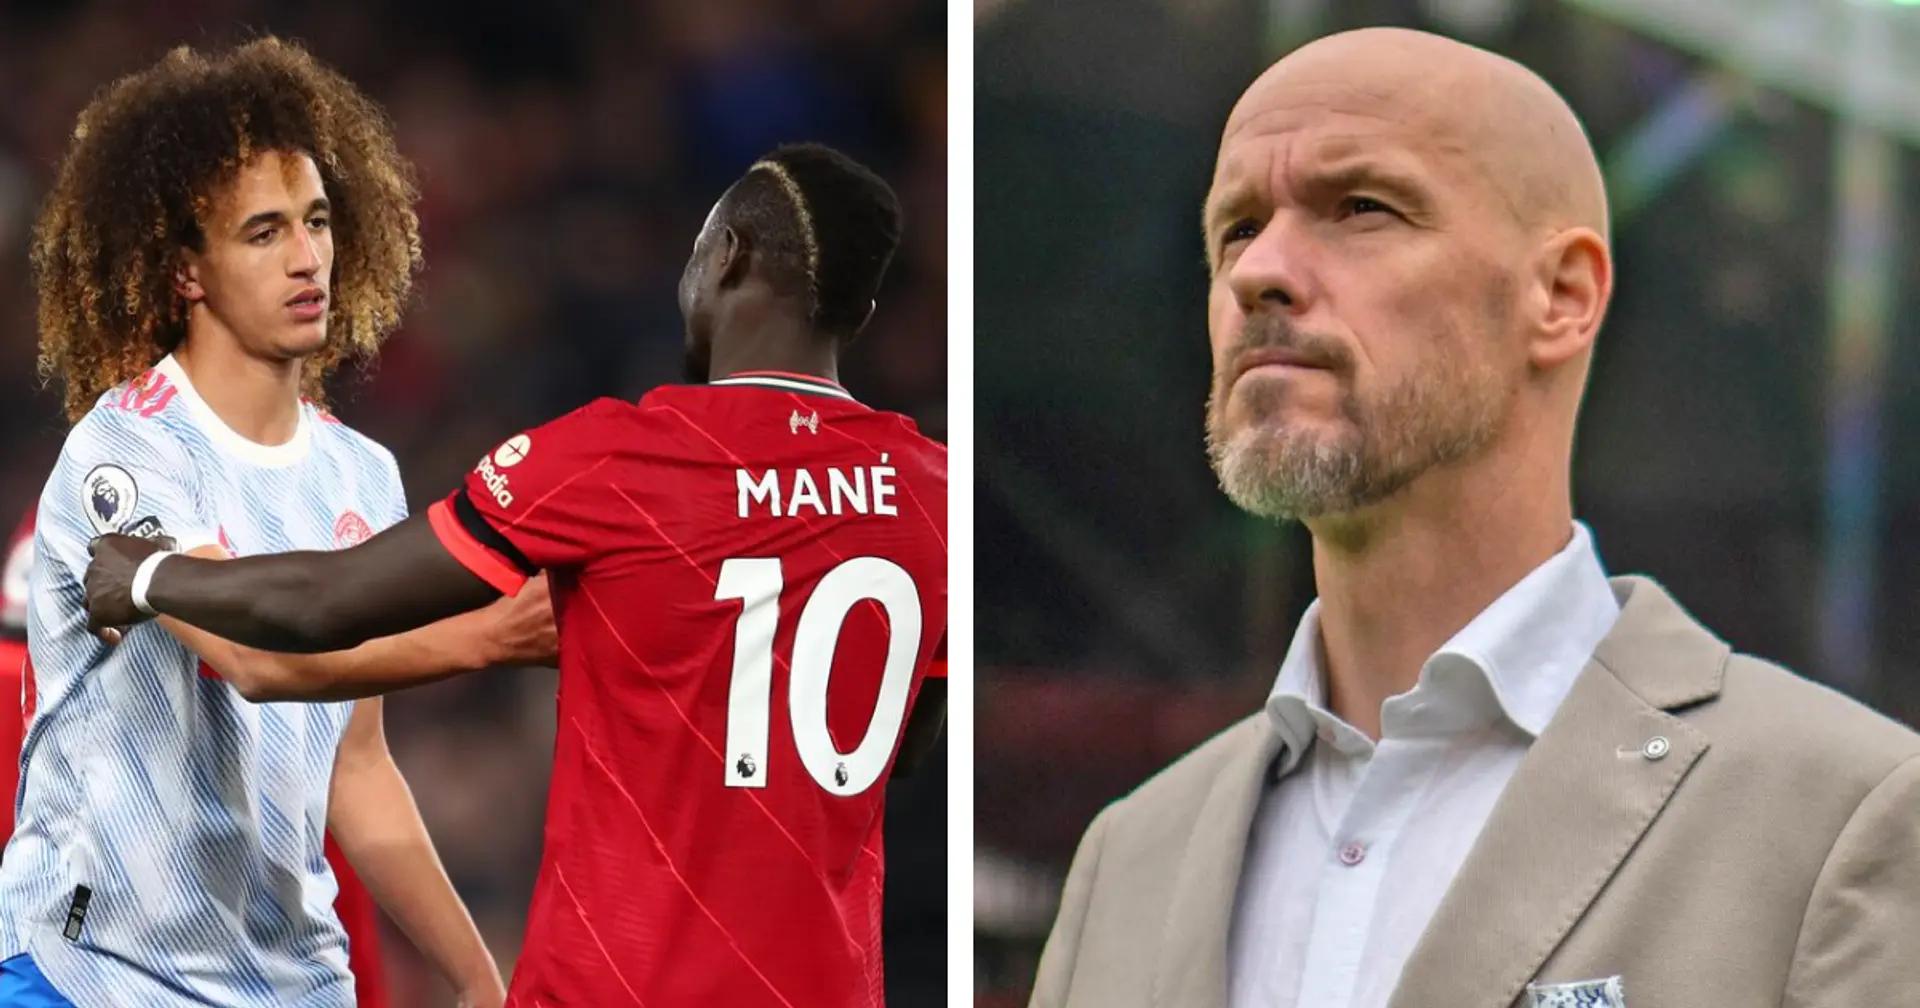 Gary Pallister tells Erik ten Hag which 3 Man United youngsters he should promote next season